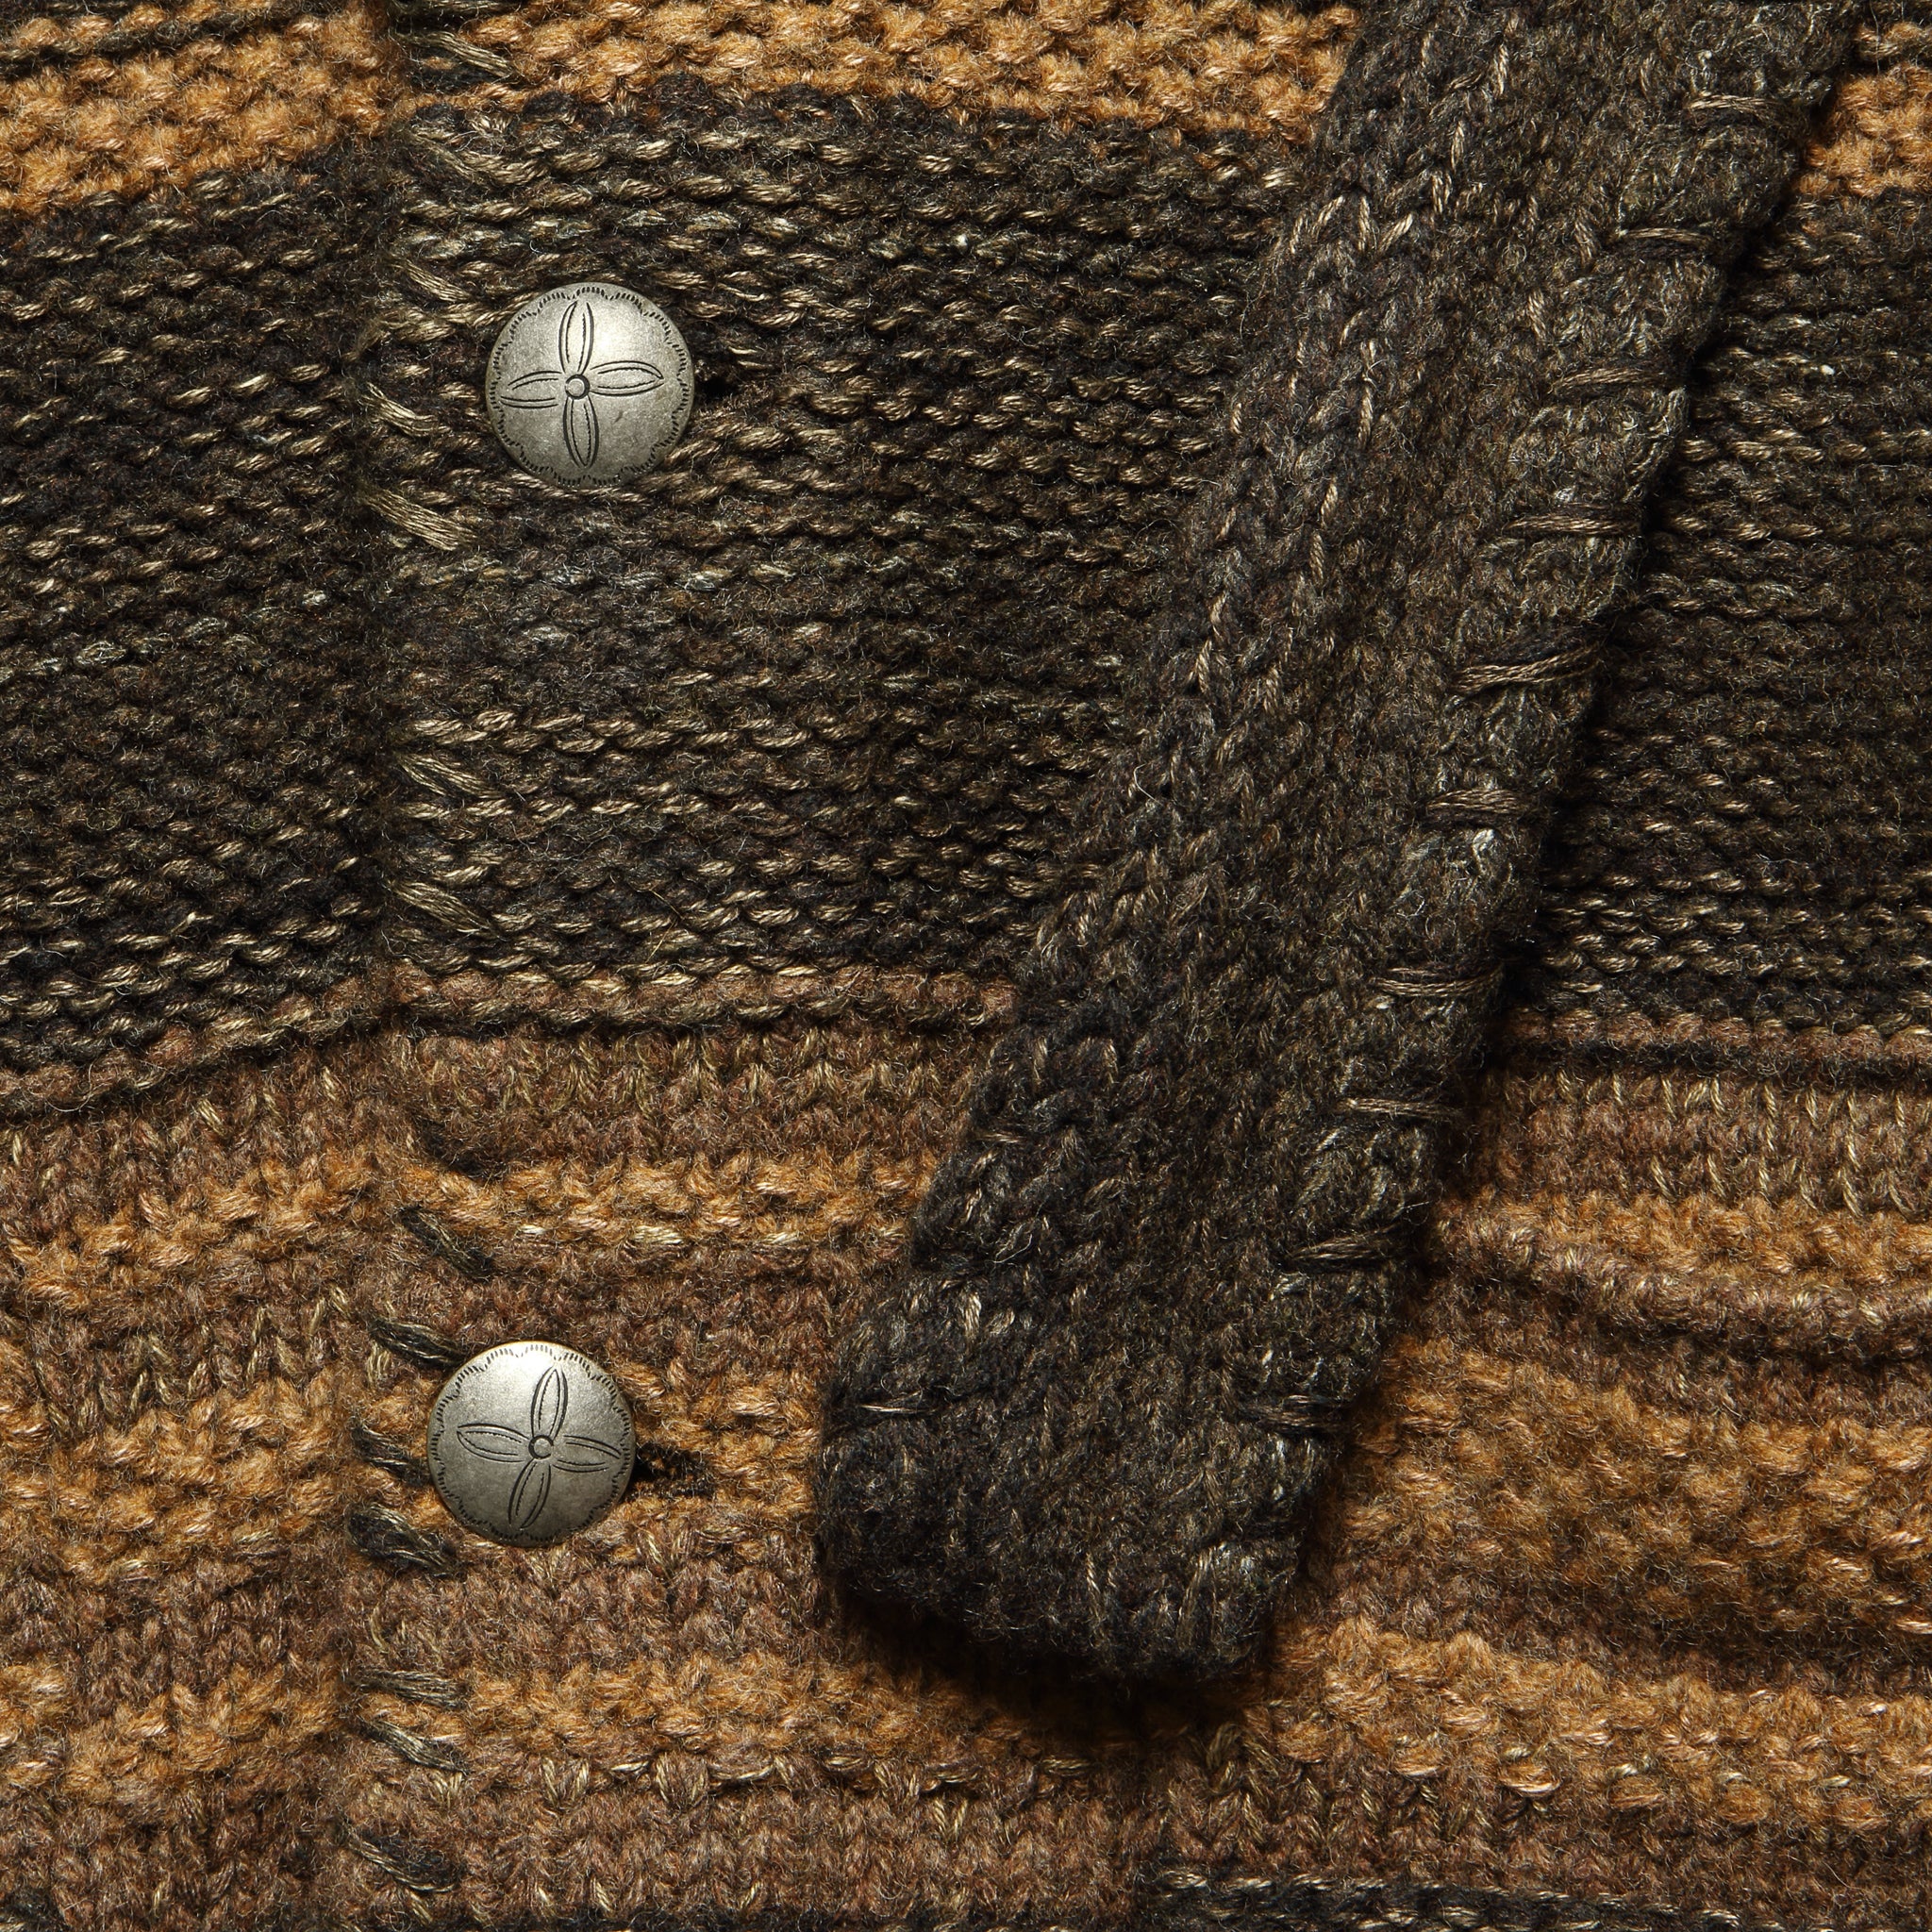 Ranch Shawl Collar Cardigan - Brown - RRL - STAG Provisions - Tops - Sweater